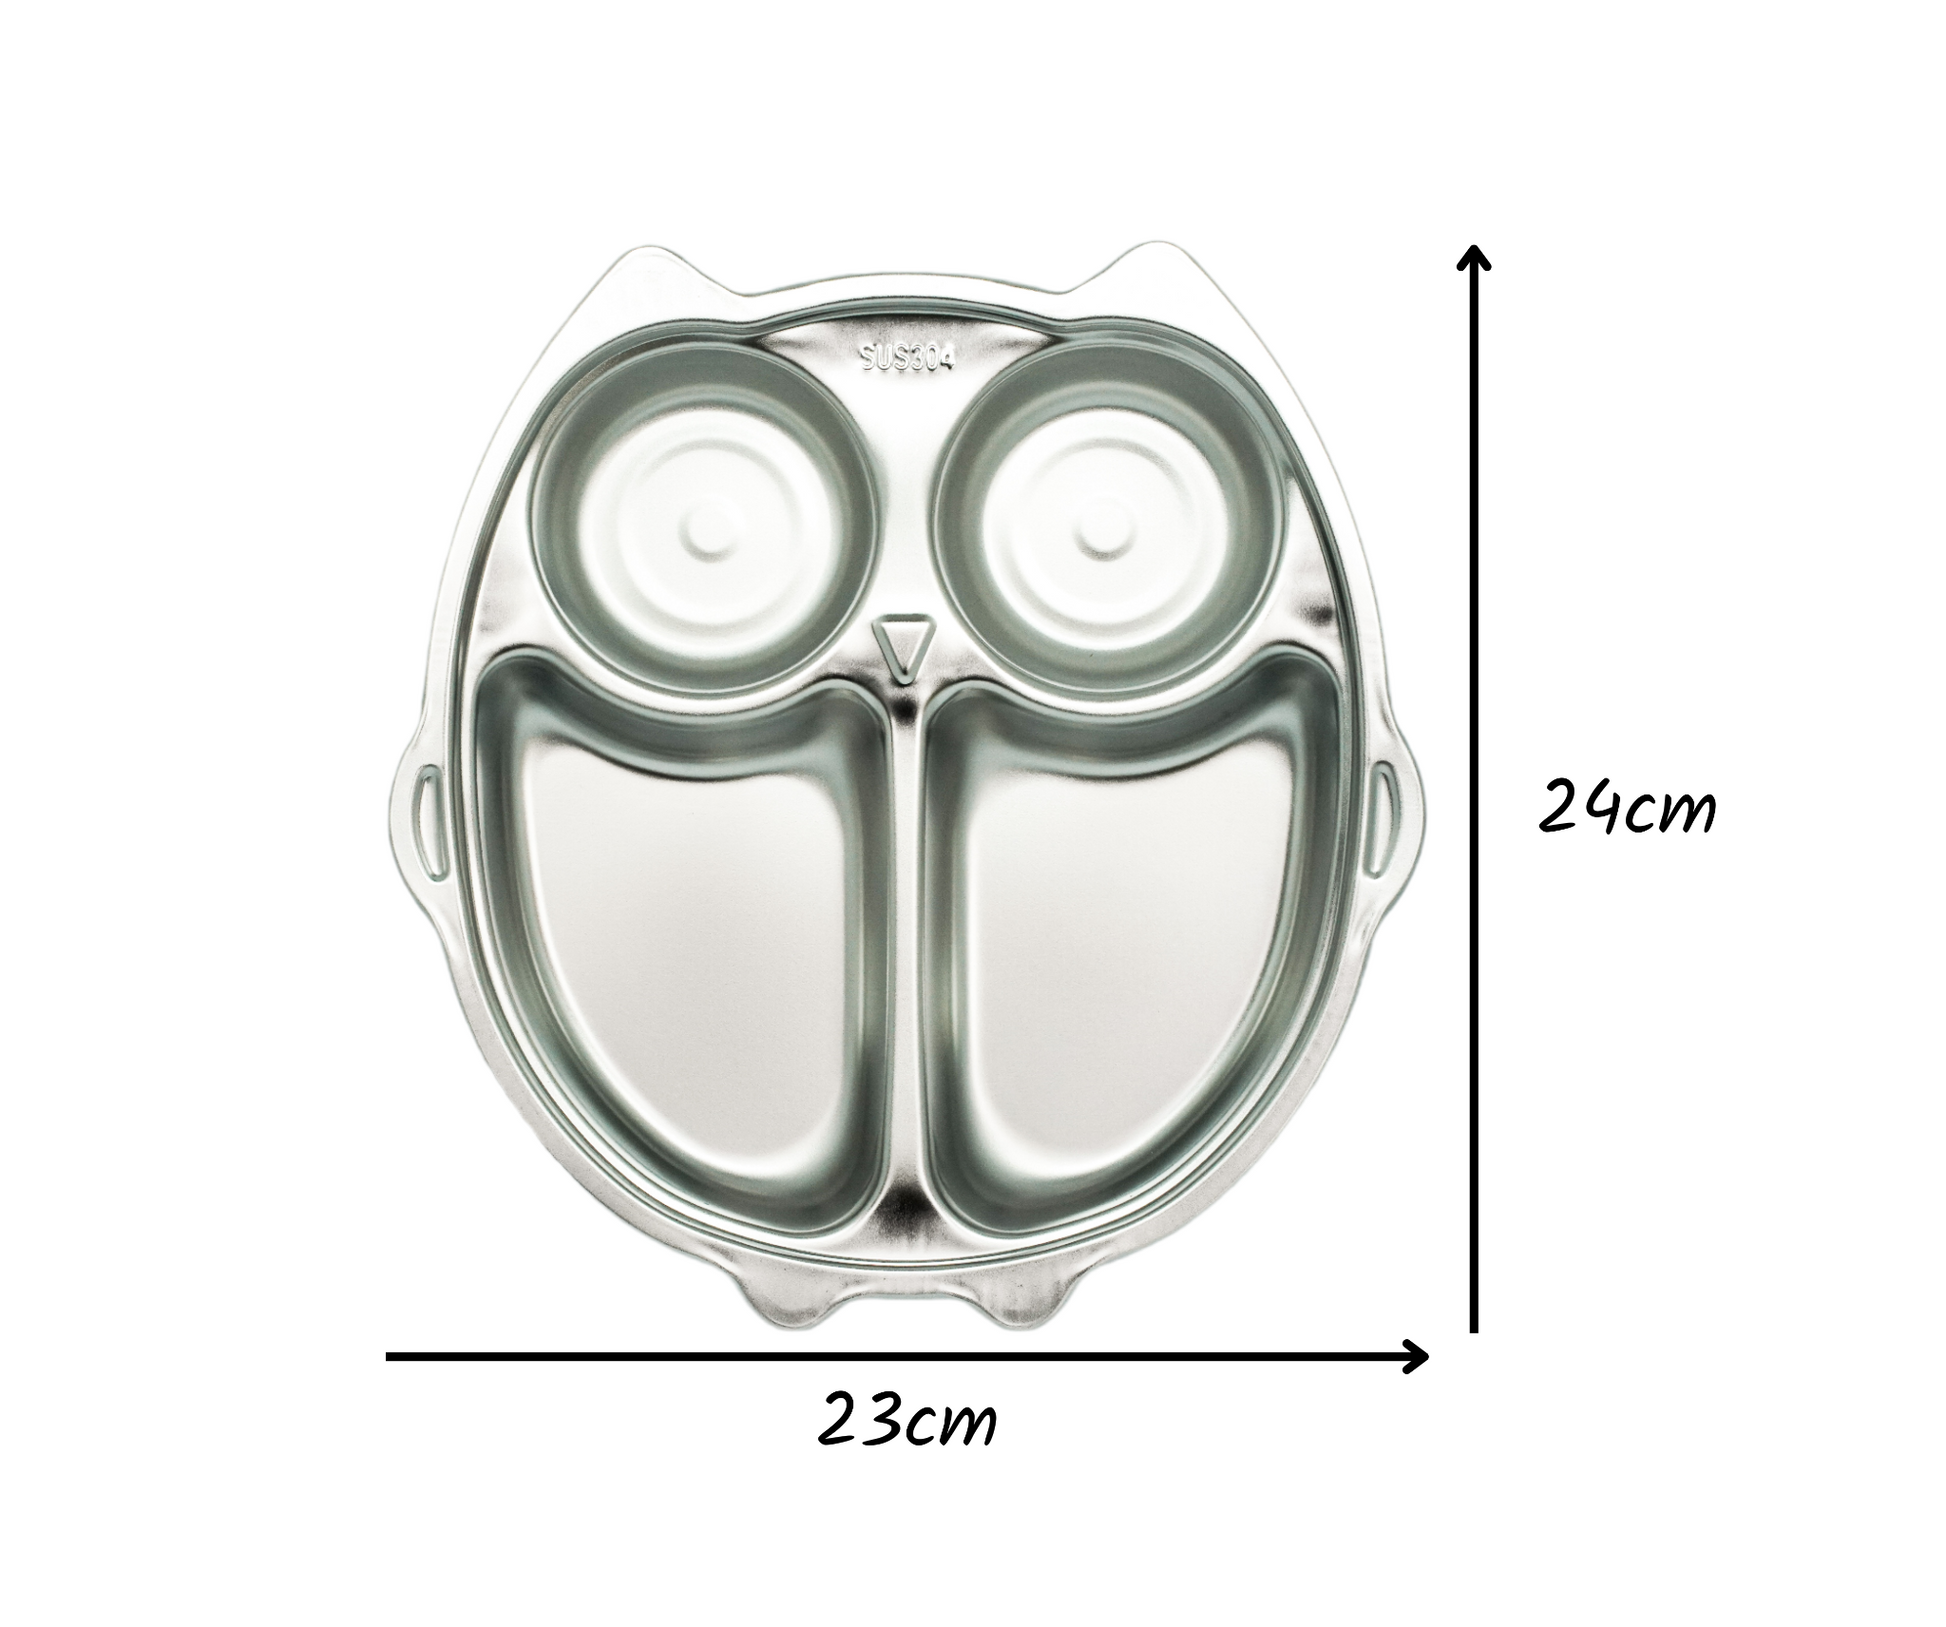 Stainless Steel Owl Section Plate Mindful Mealtime